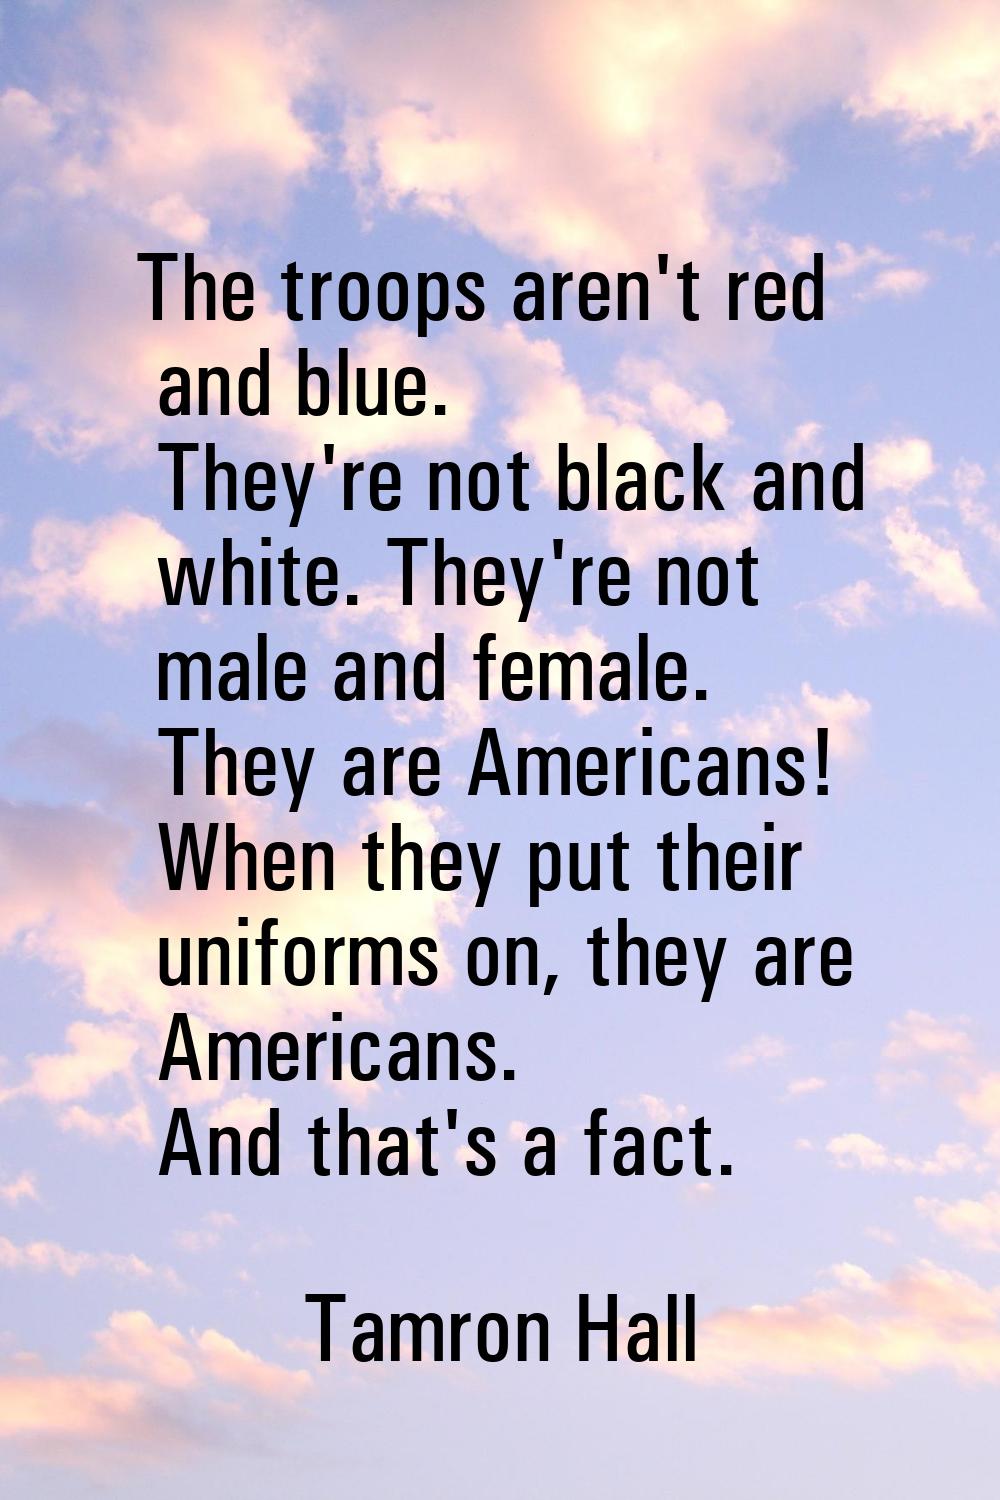 The troops aren't red and blue. They're not black and white. They're not male and female. They are 